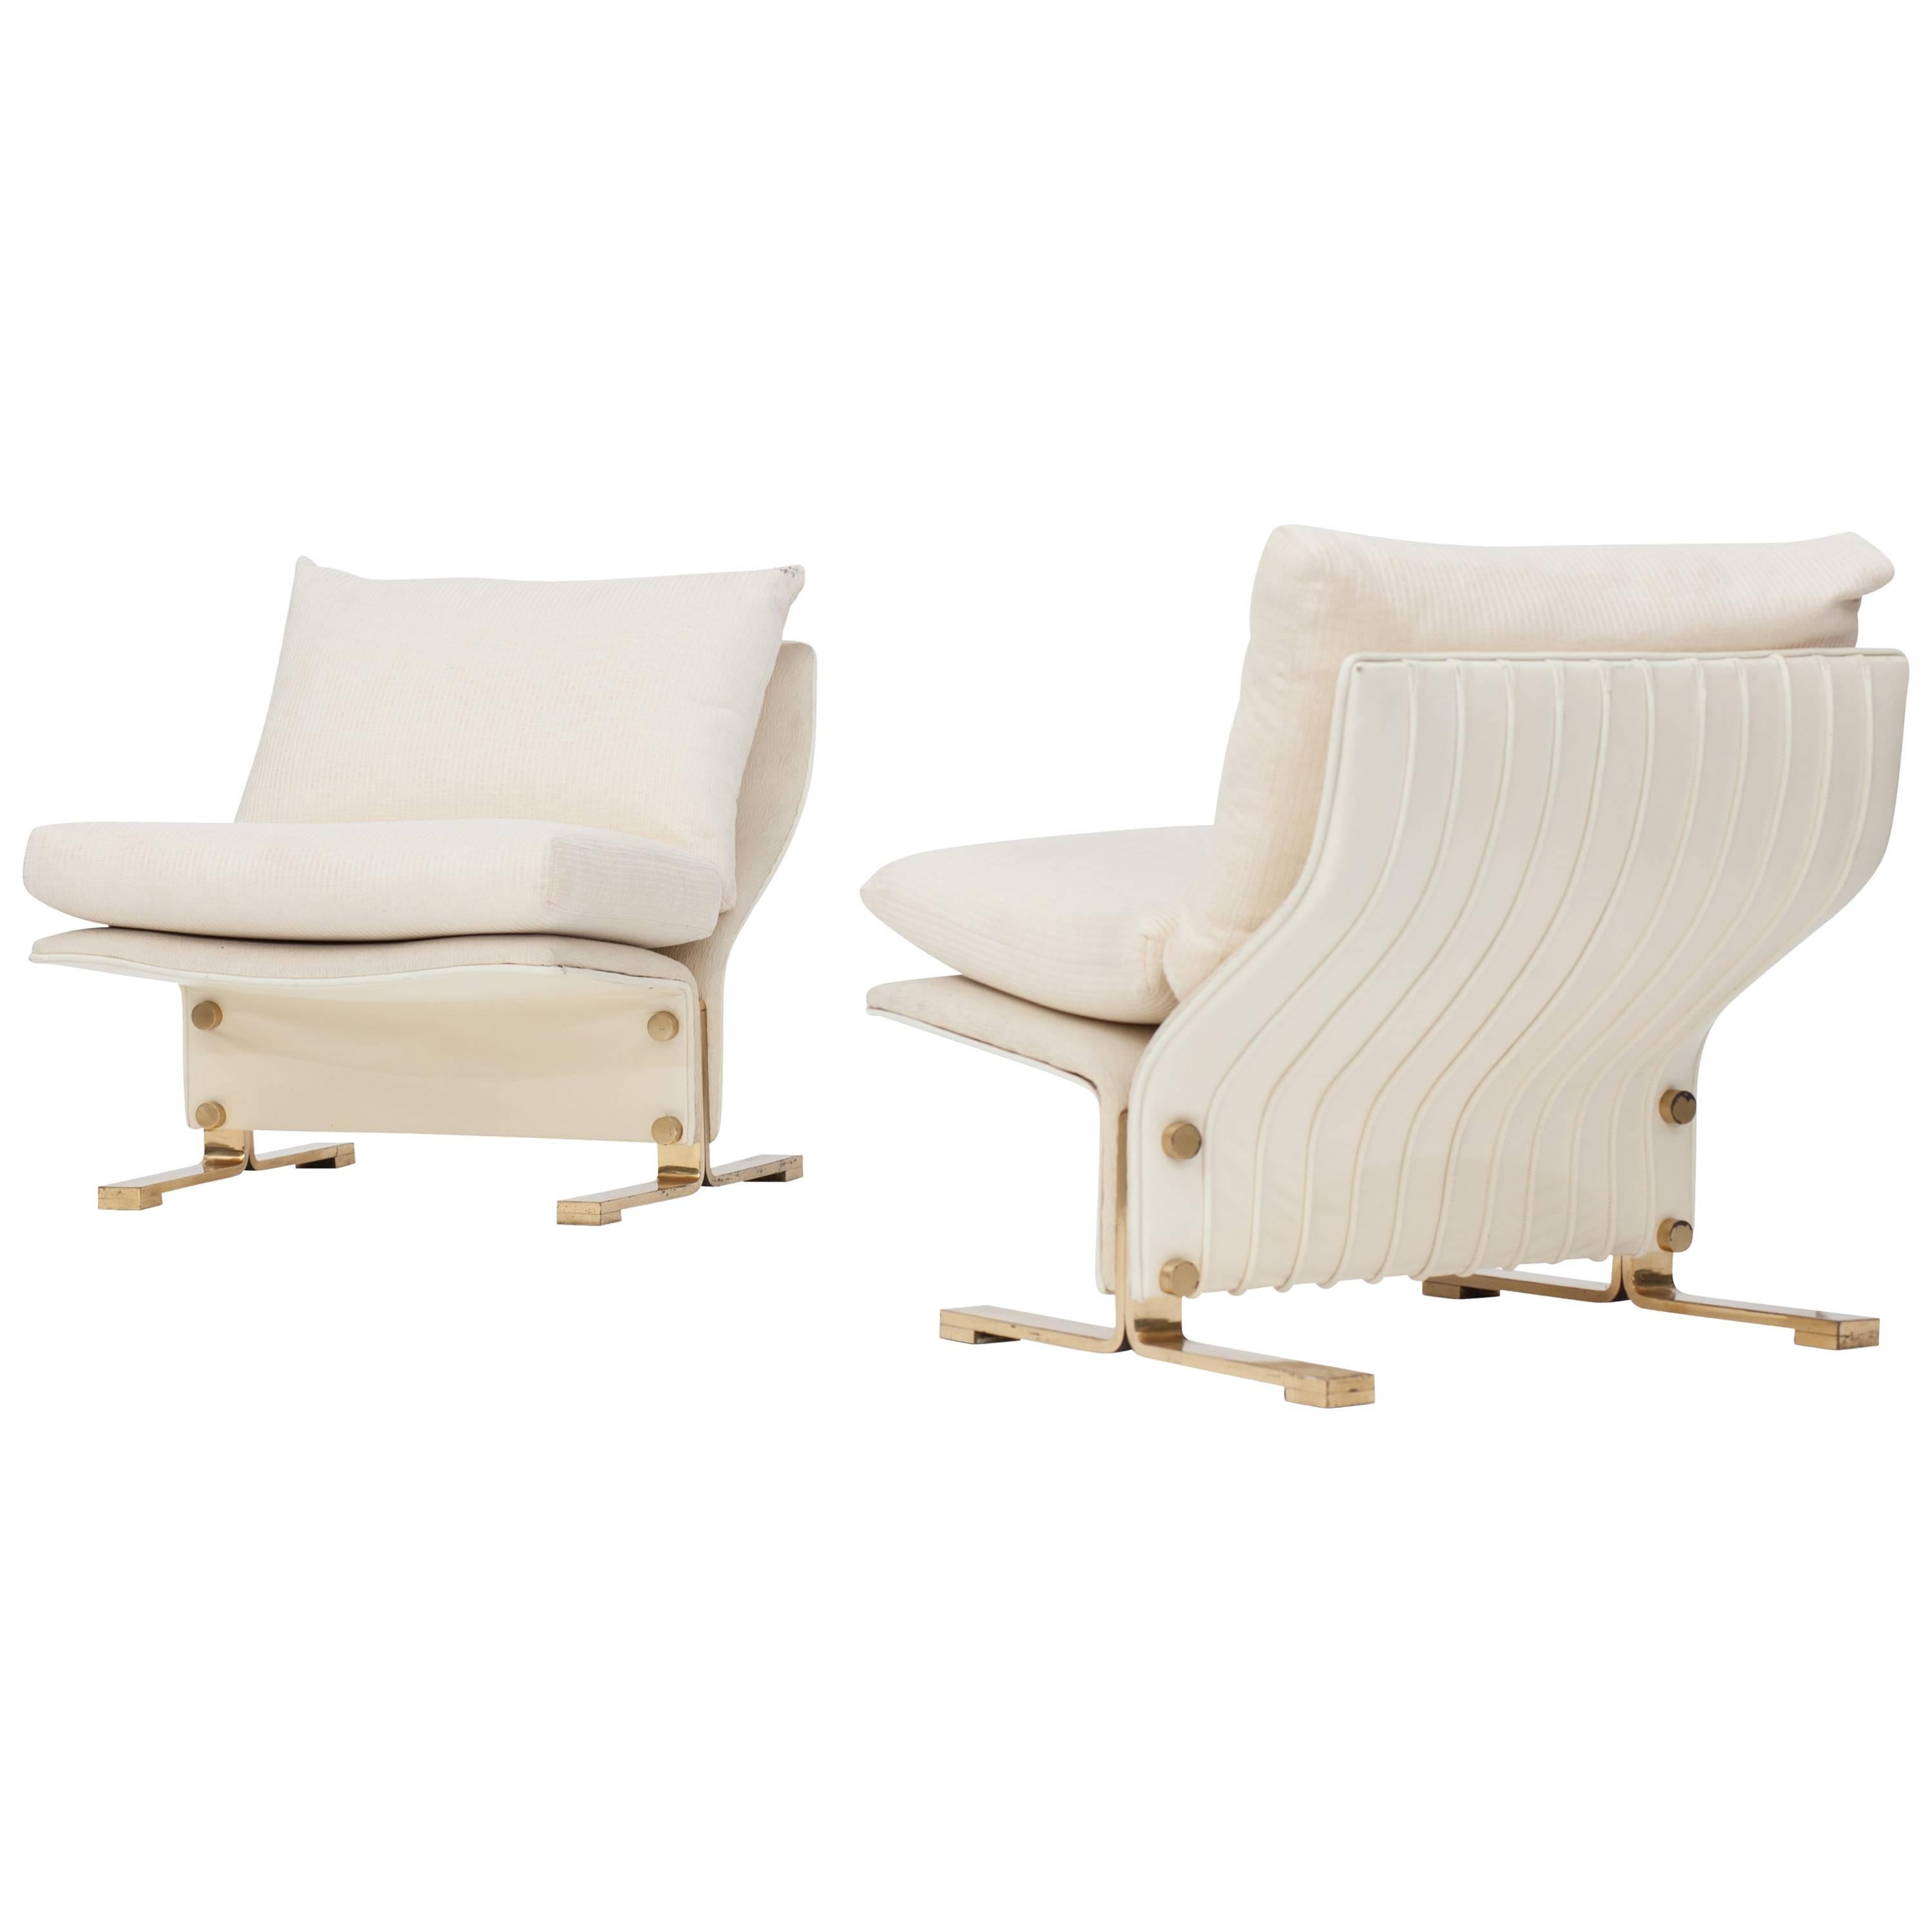 Marzio Cecchi Pair of Lounge chairs Italy, 1960s